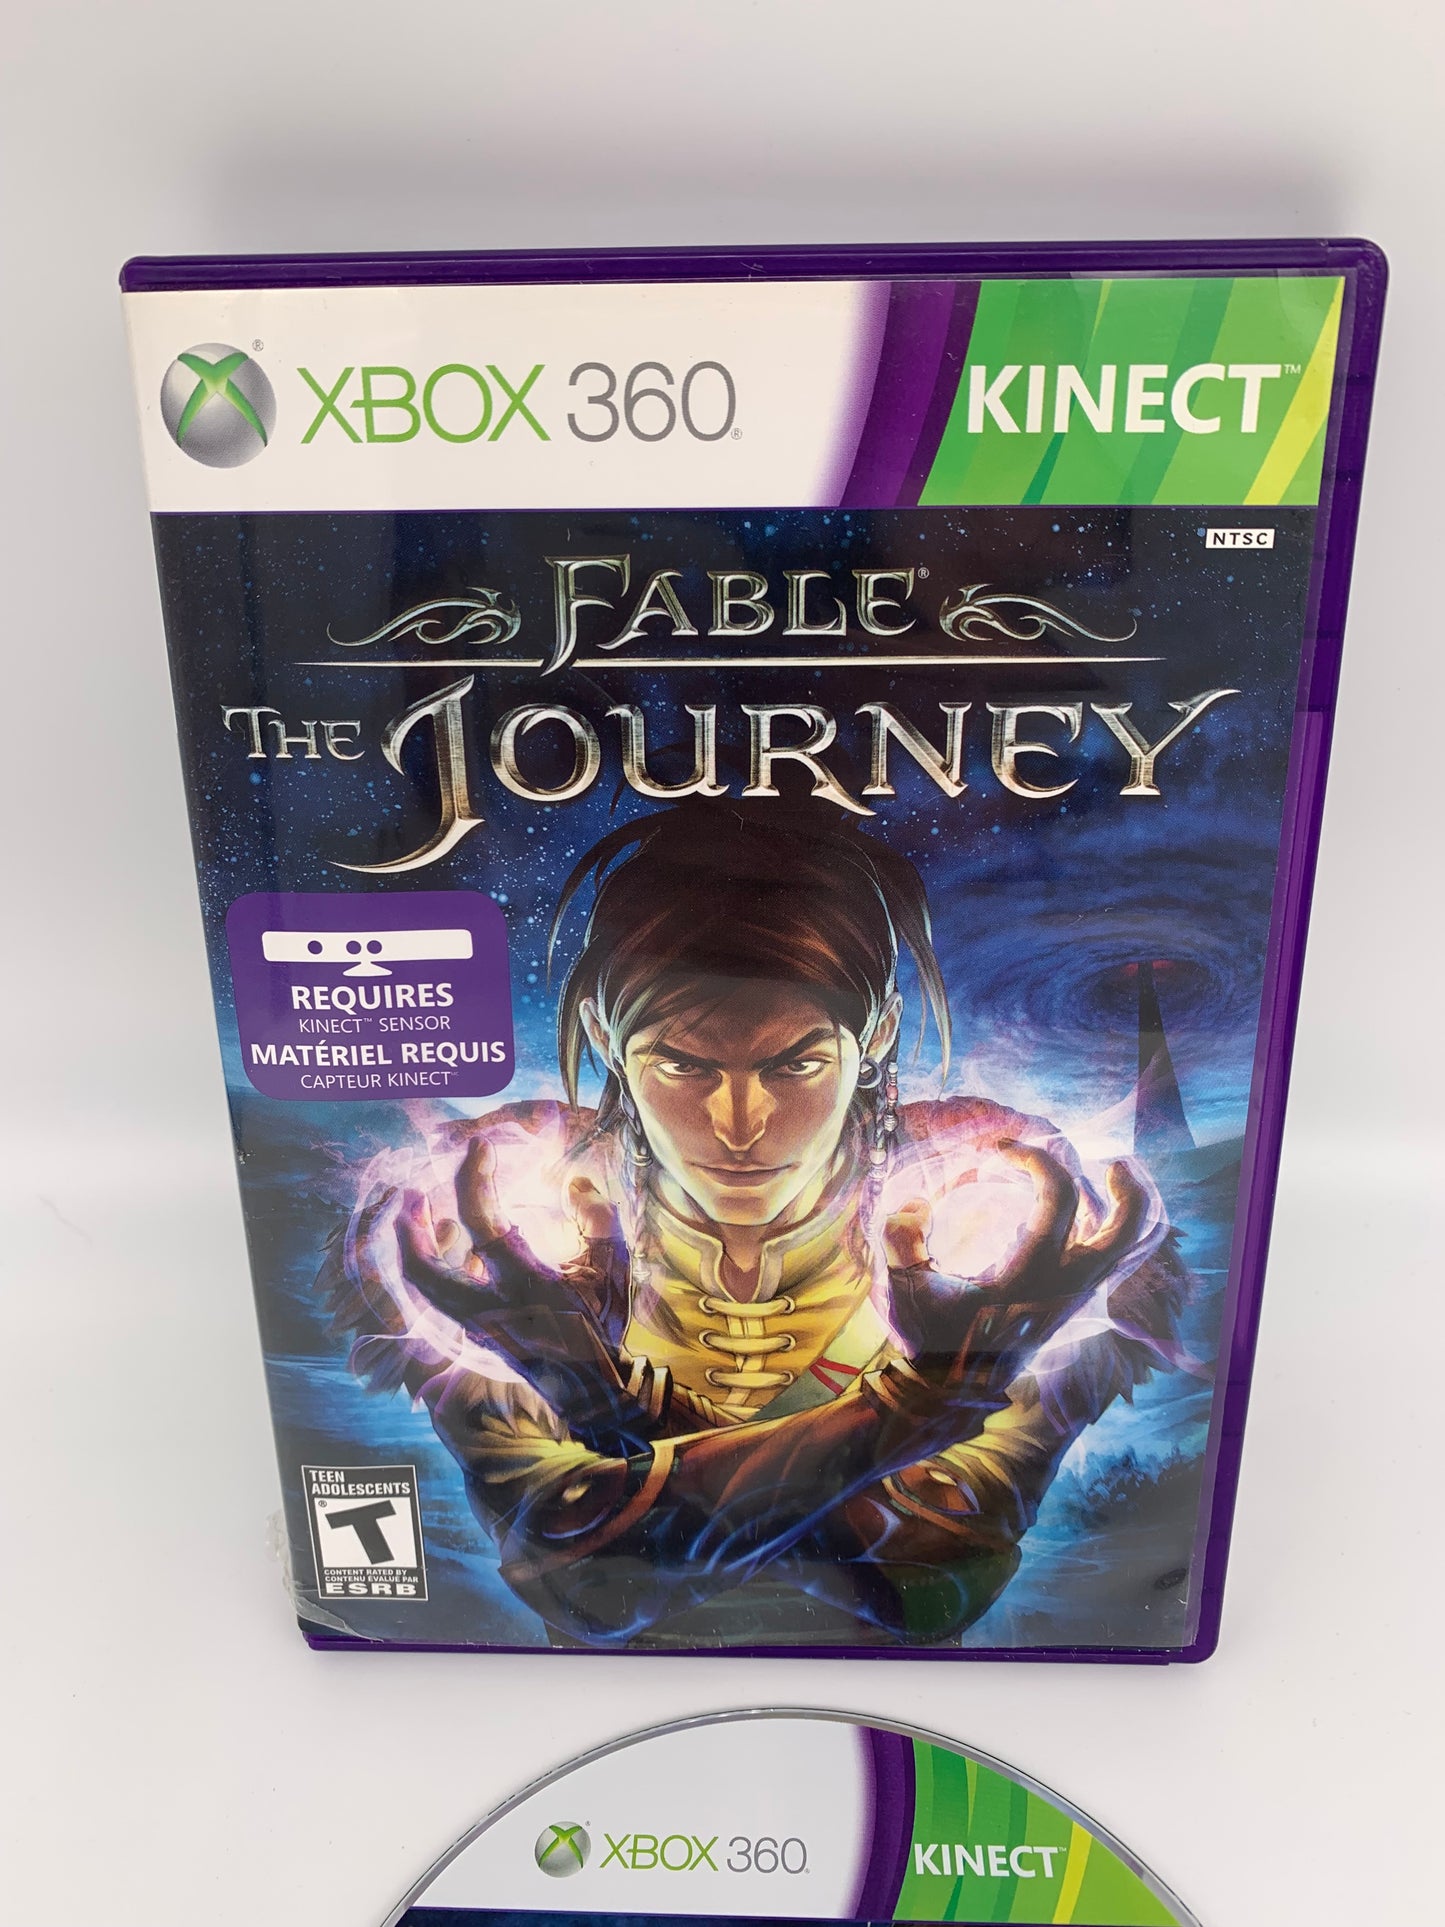 MiCROSOFT XBOX 360 | FABLE THE JOURNEY